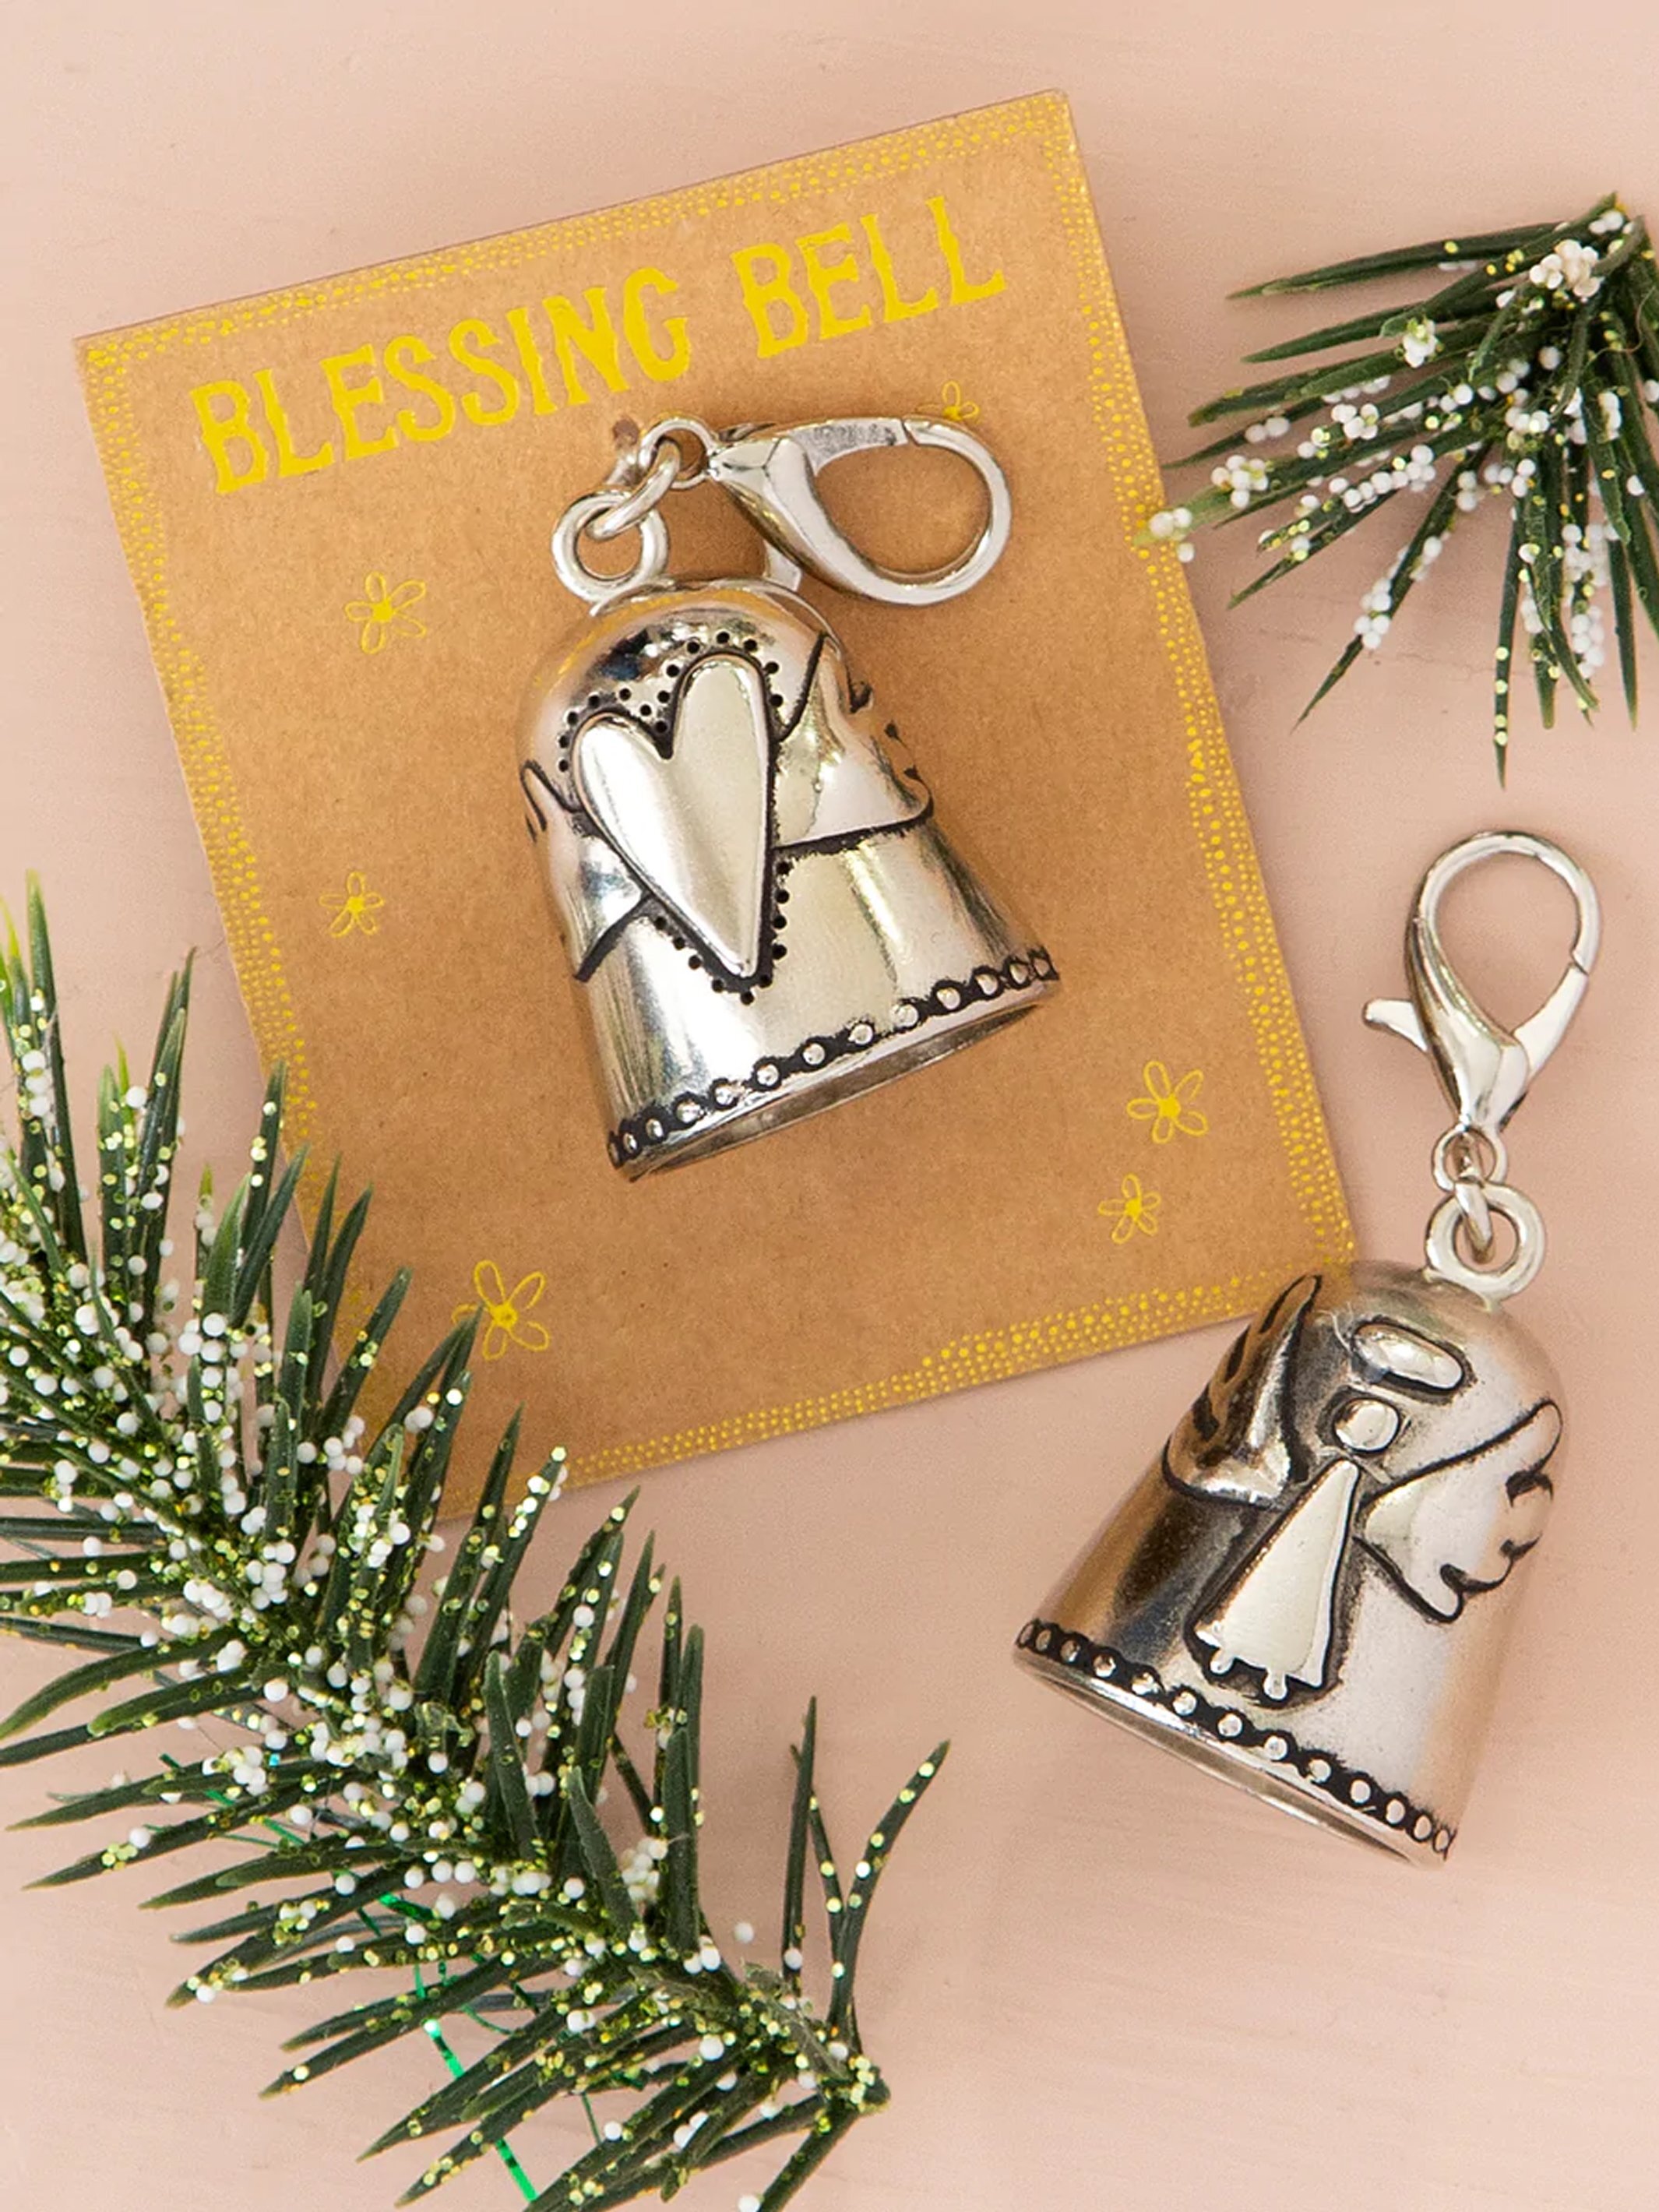 🔥 Clearance Sale 47% OFF🔥Blessing Bell Friends are Angels